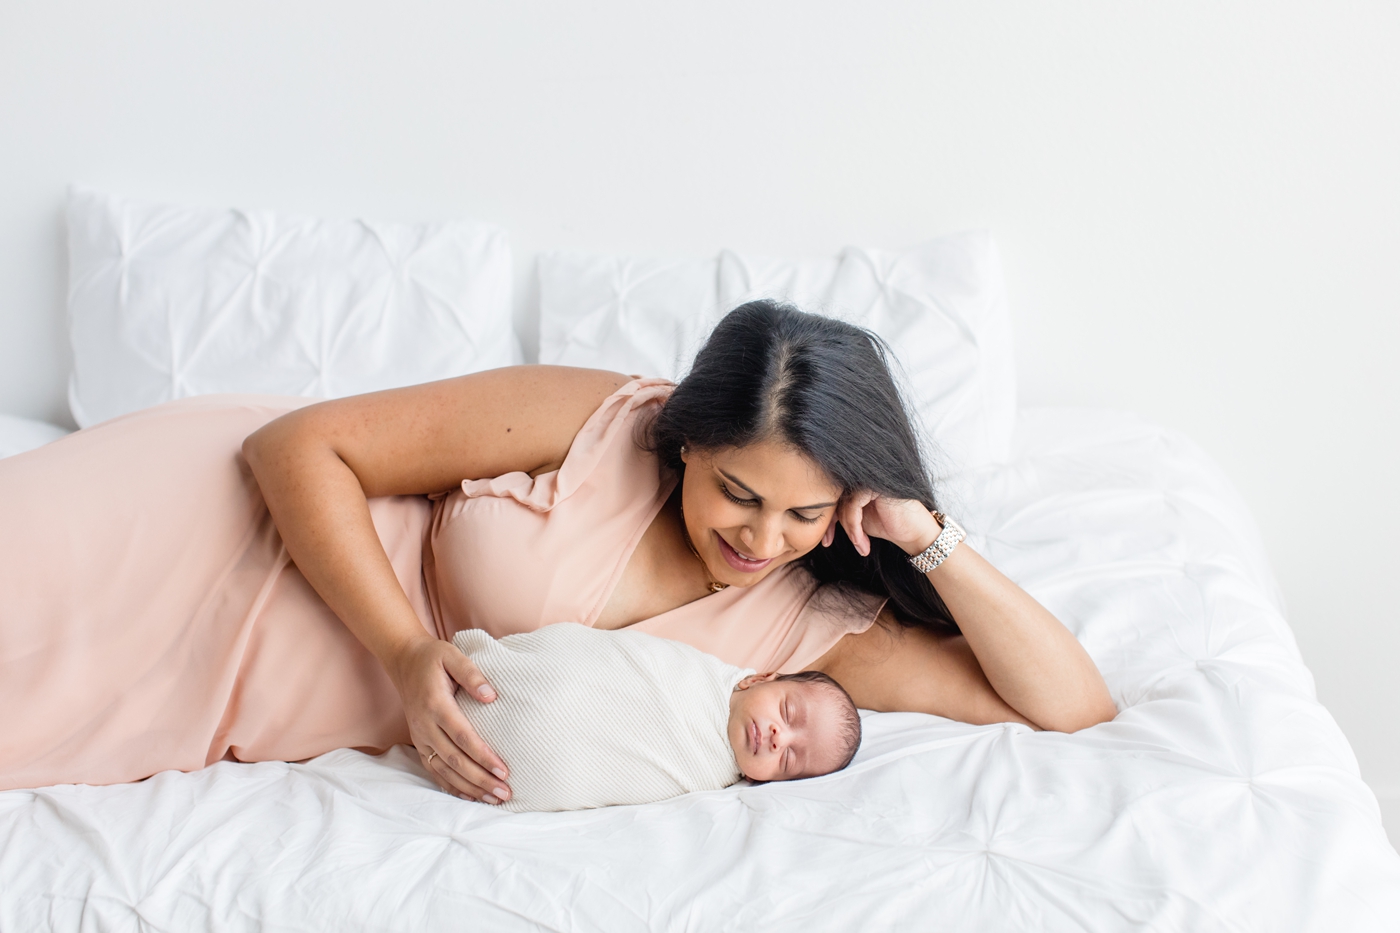 Mom laying next to baby during Austin TX newborn session. Photo by Sana Ahmed Photography.